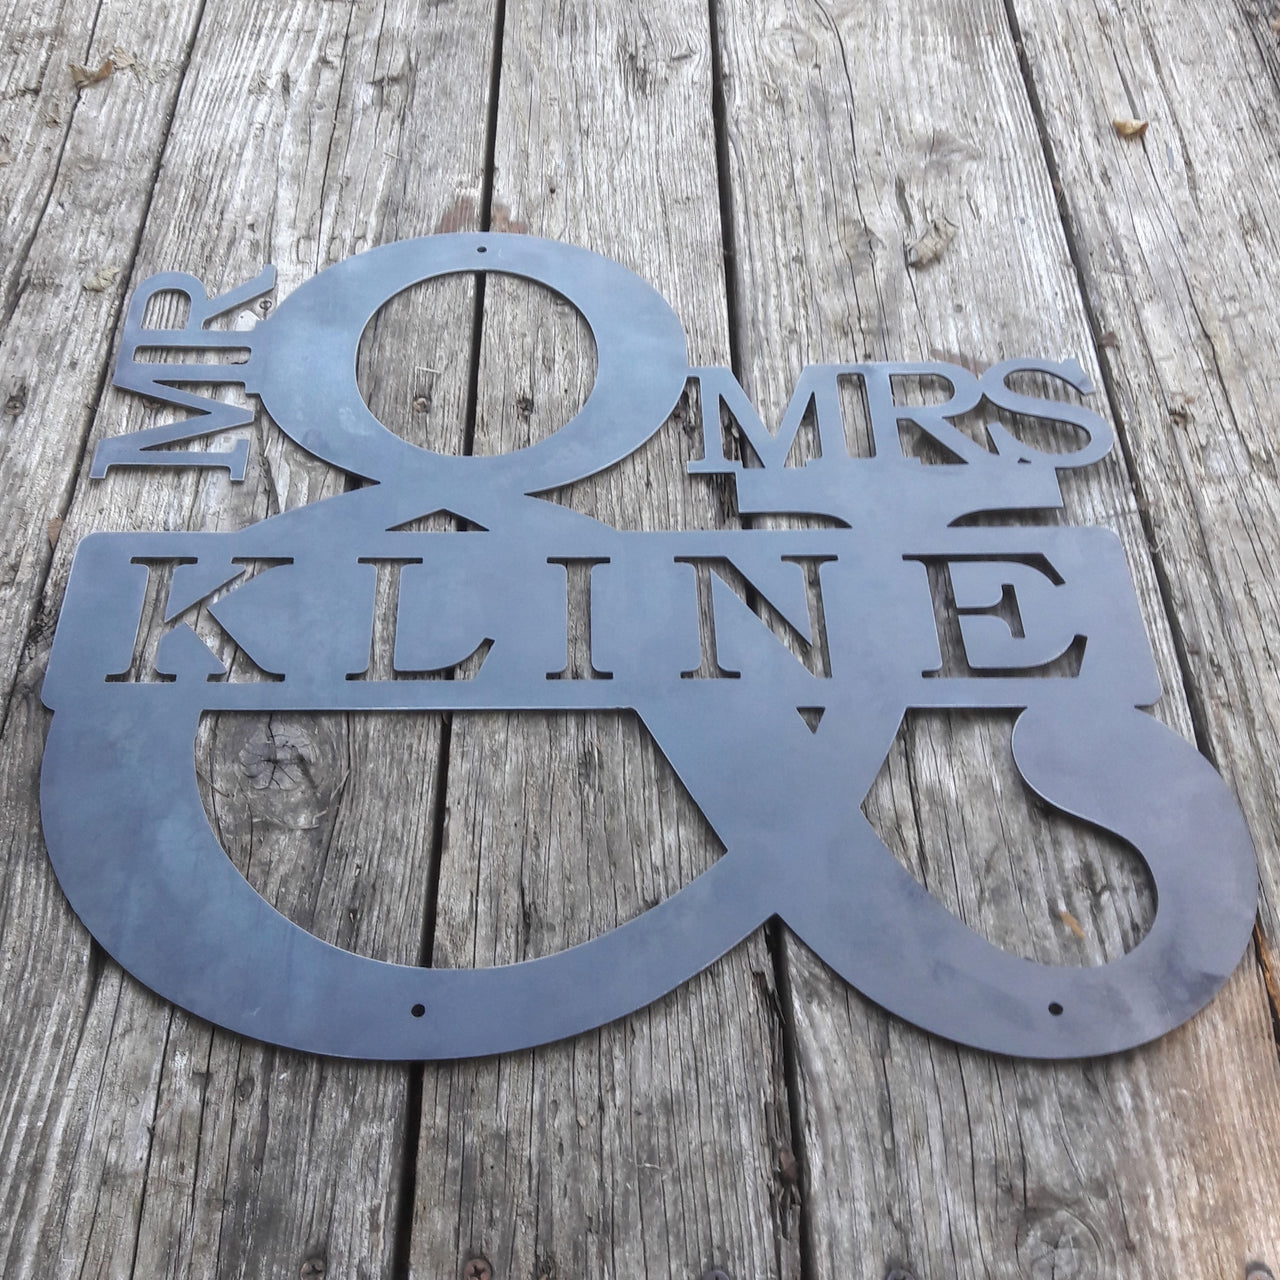 Personalized metal sign in the shape of an ampersand. The sign reads, "Mr. & Mrs. Kline".